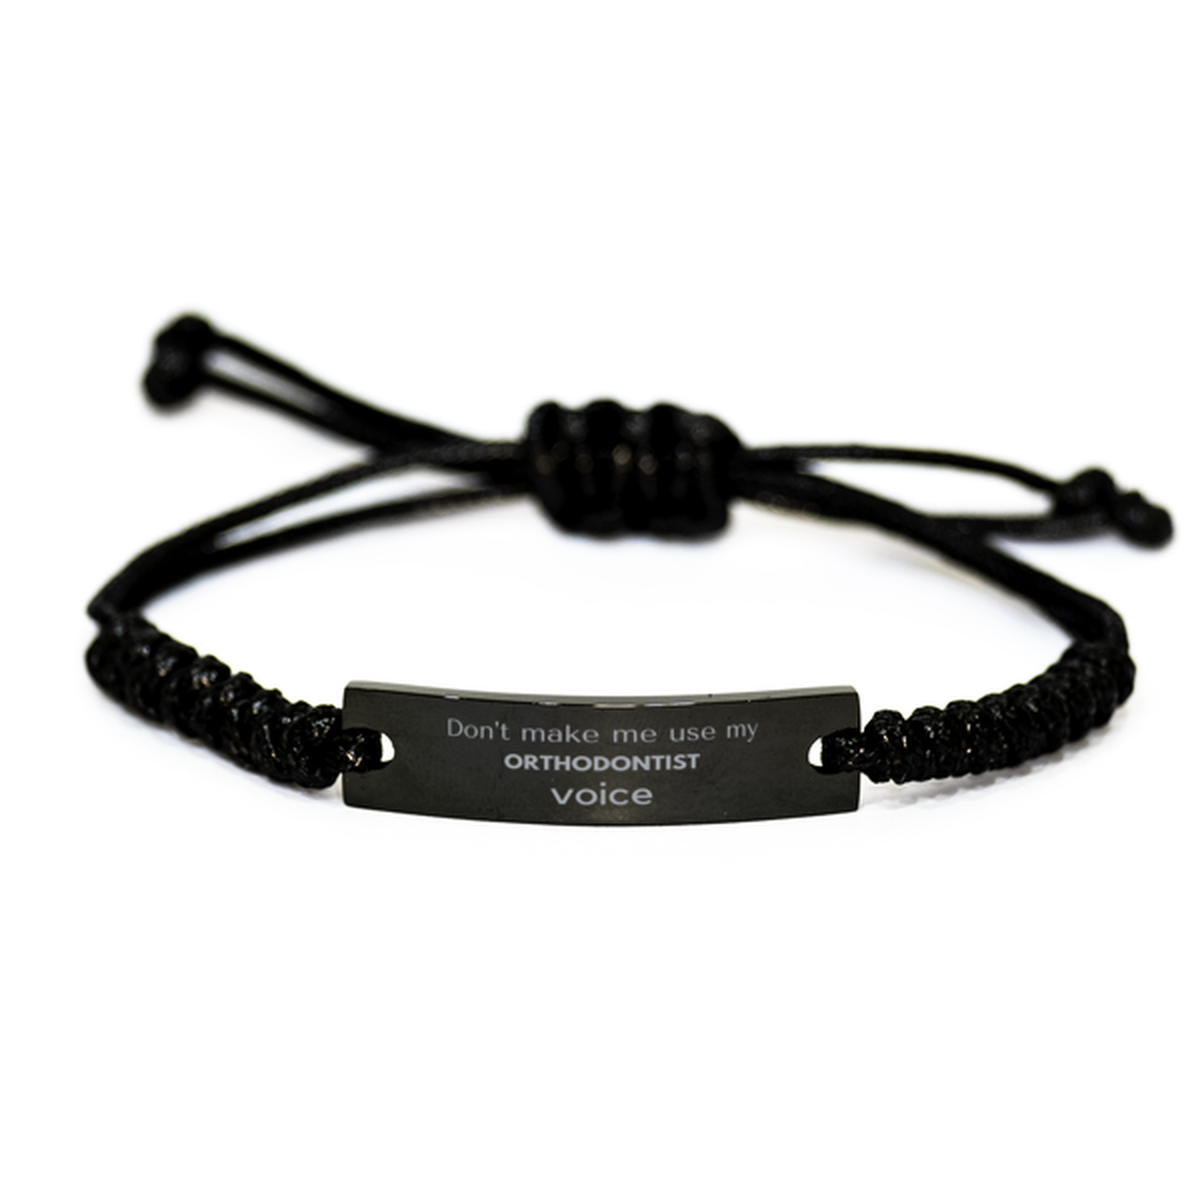 Don't make me use my Orthodontist voice, Sarcasm Orthodontist Gifts, Christmas Orthodontist Black Rope Bracelet Birthday Unique Gifts For Orthodontist Coworkers, Men, Women, Colleague, Friends